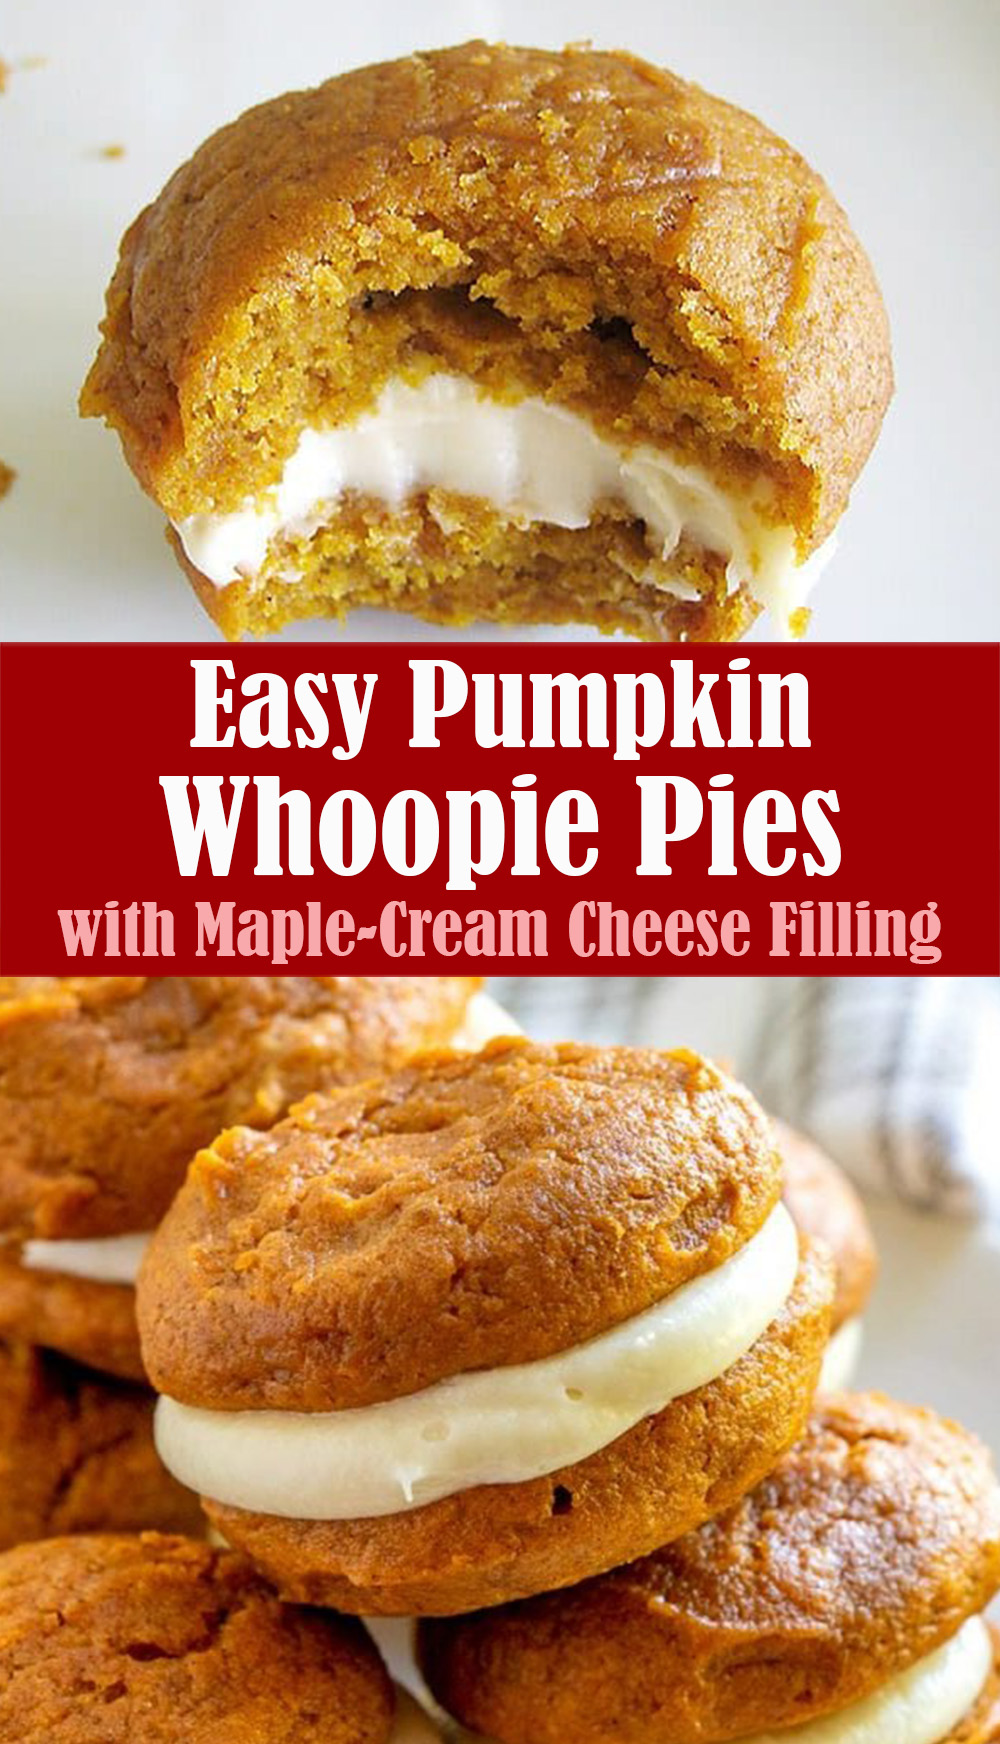 Easy Pumpkin Whoopie Pies with Maple-Cream Cheese Filling